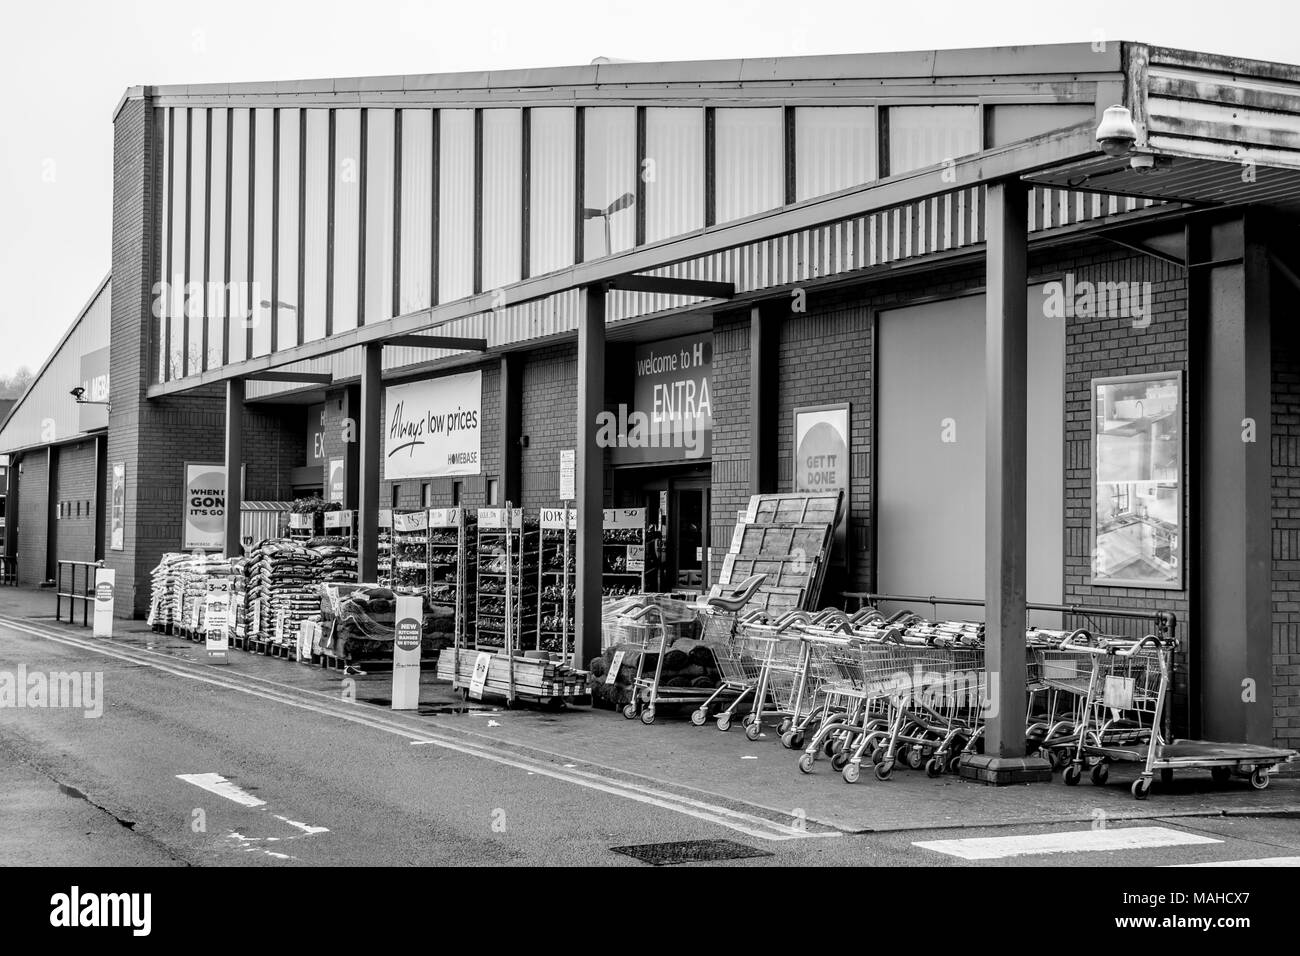 The Homebase DIY store in Newcastle under Lyme Staffordshire Stock Photo